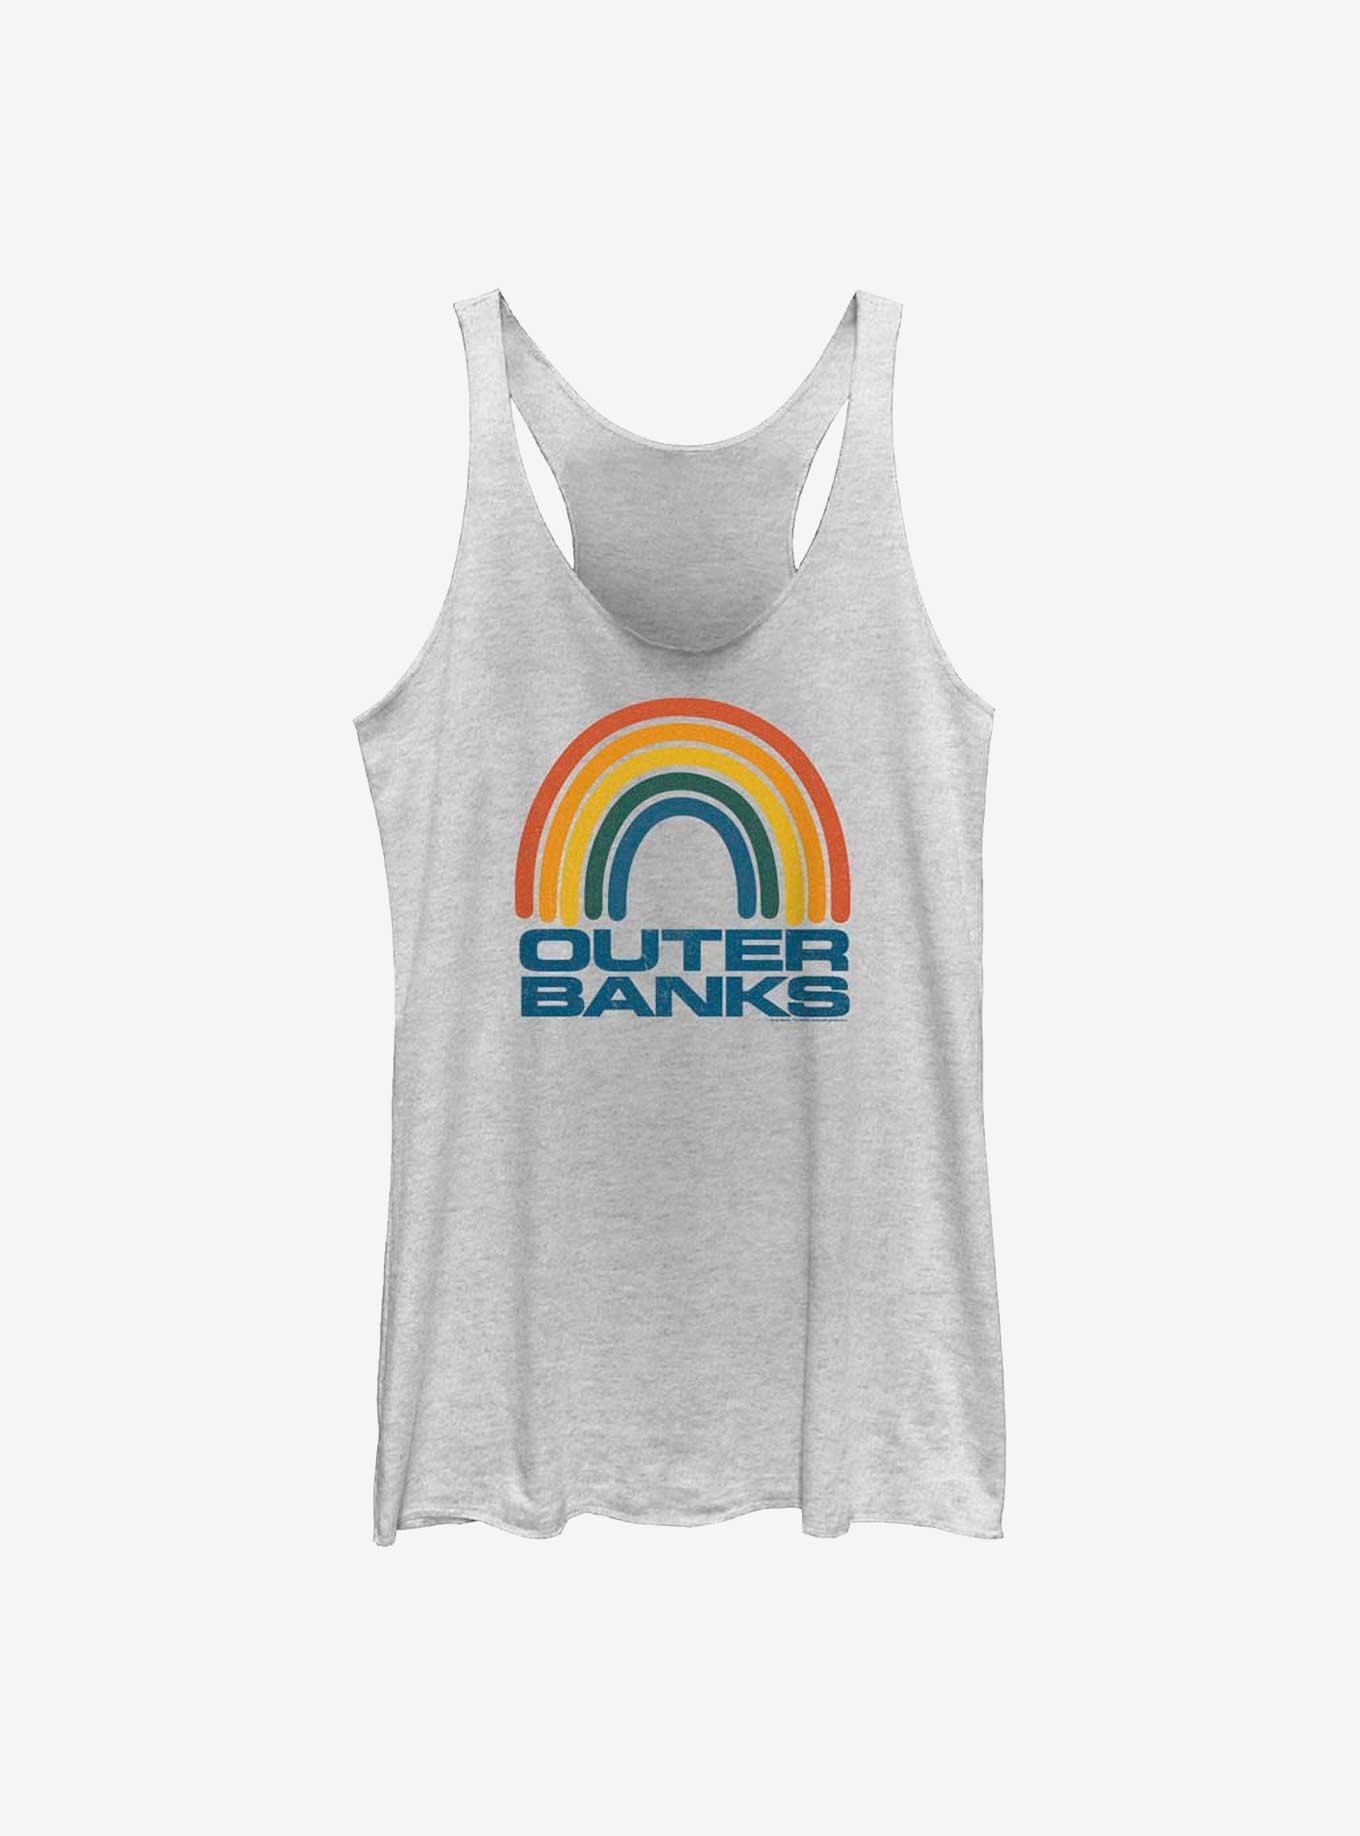 Outer Banks OBX Rainbow Girls Tank, WHITE HTR, hi-res